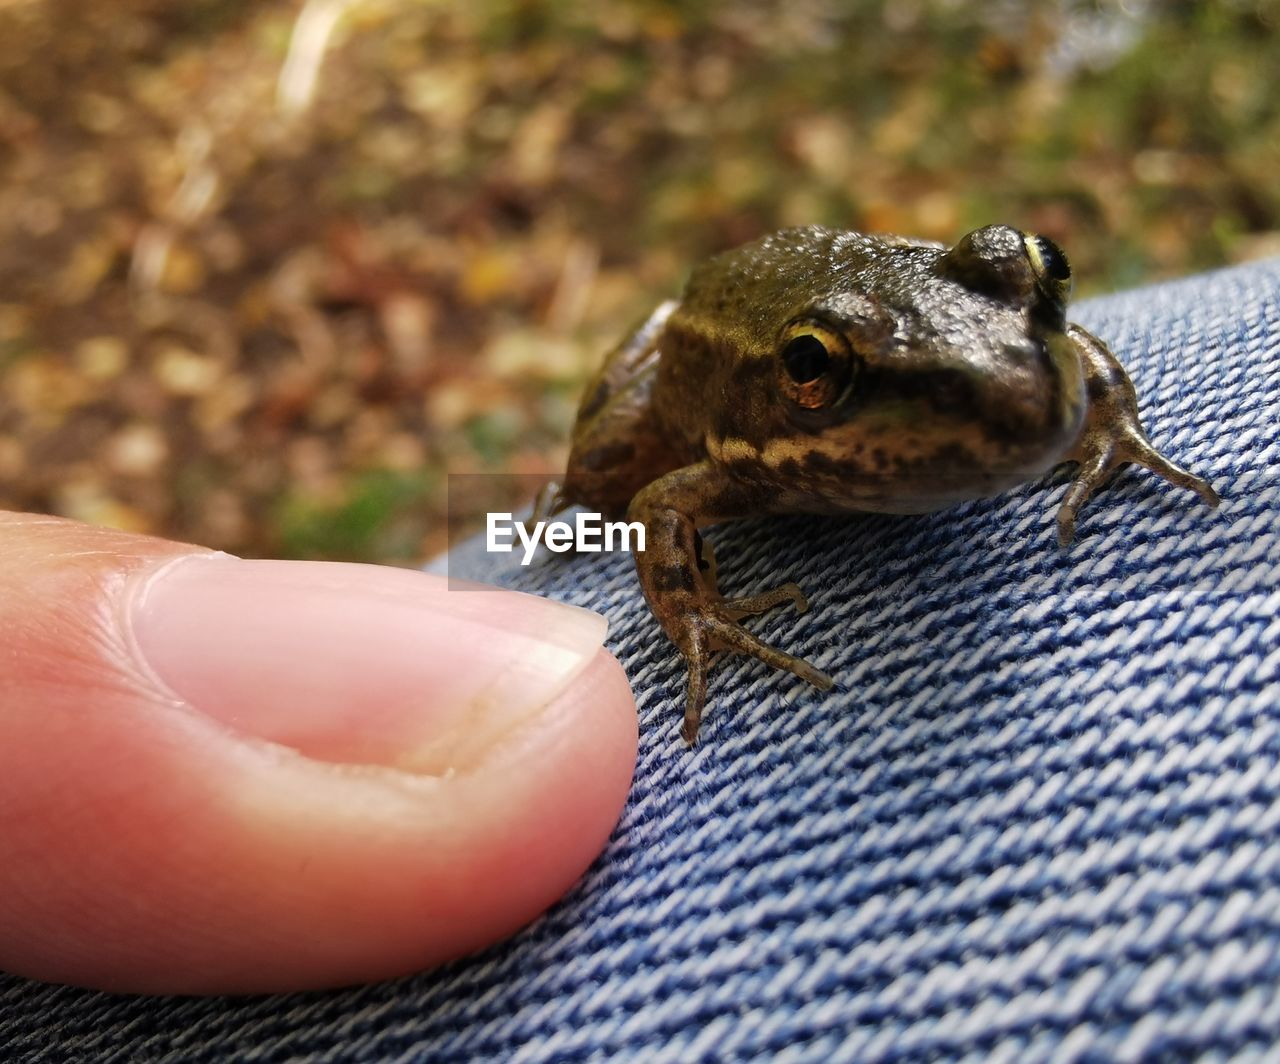 animal themes, animal, one animal, hand, animal wildlife, one person, reptile, finger, wildlife, close-up, frog, toad, macro photography, holding, amphibian, focus on foreground, animal body part, day, lizard, nature, outdoors, true frog